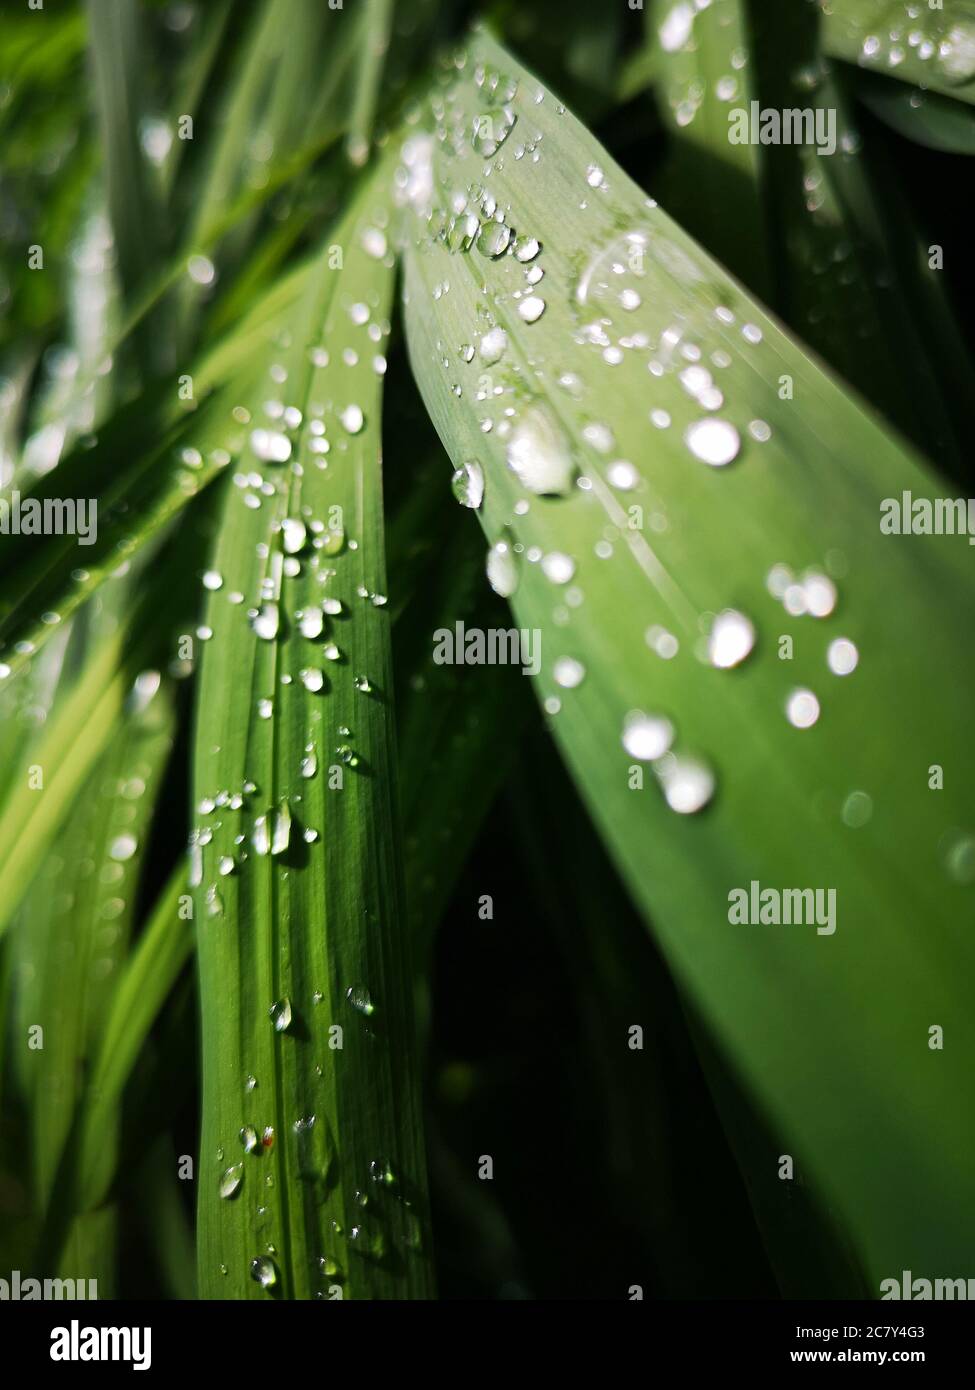 Green leaves in the rain, covered with raindrops, beautiful nature background and concept Stock Photo